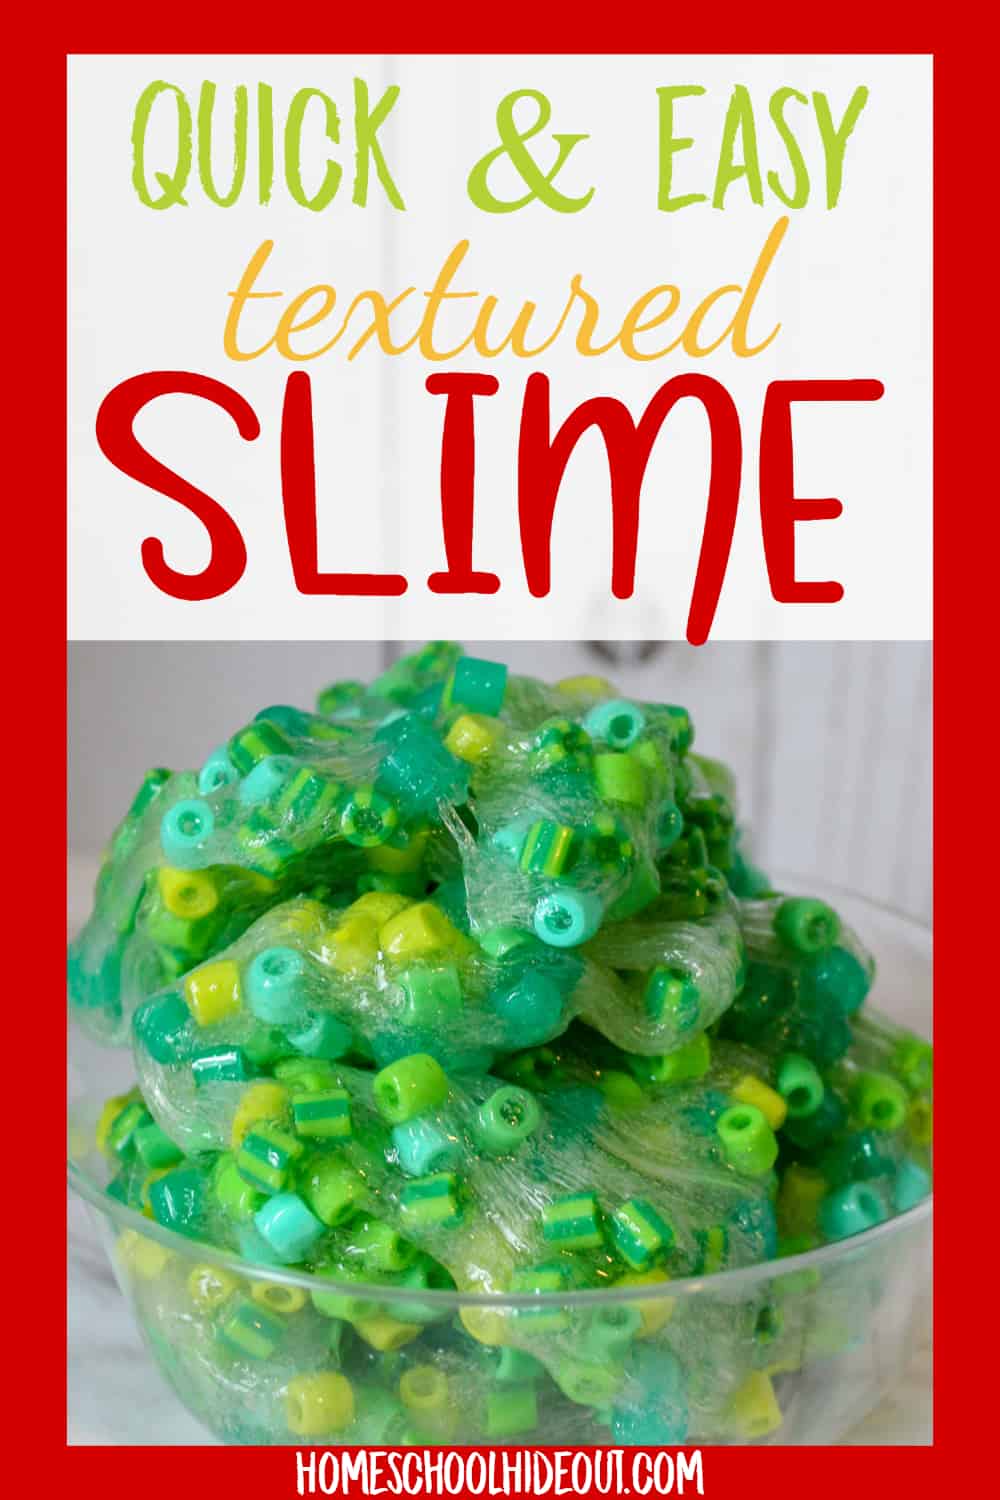 Textured slime is fun and easy to make. With only a few ingredients, your kiddos will love it!